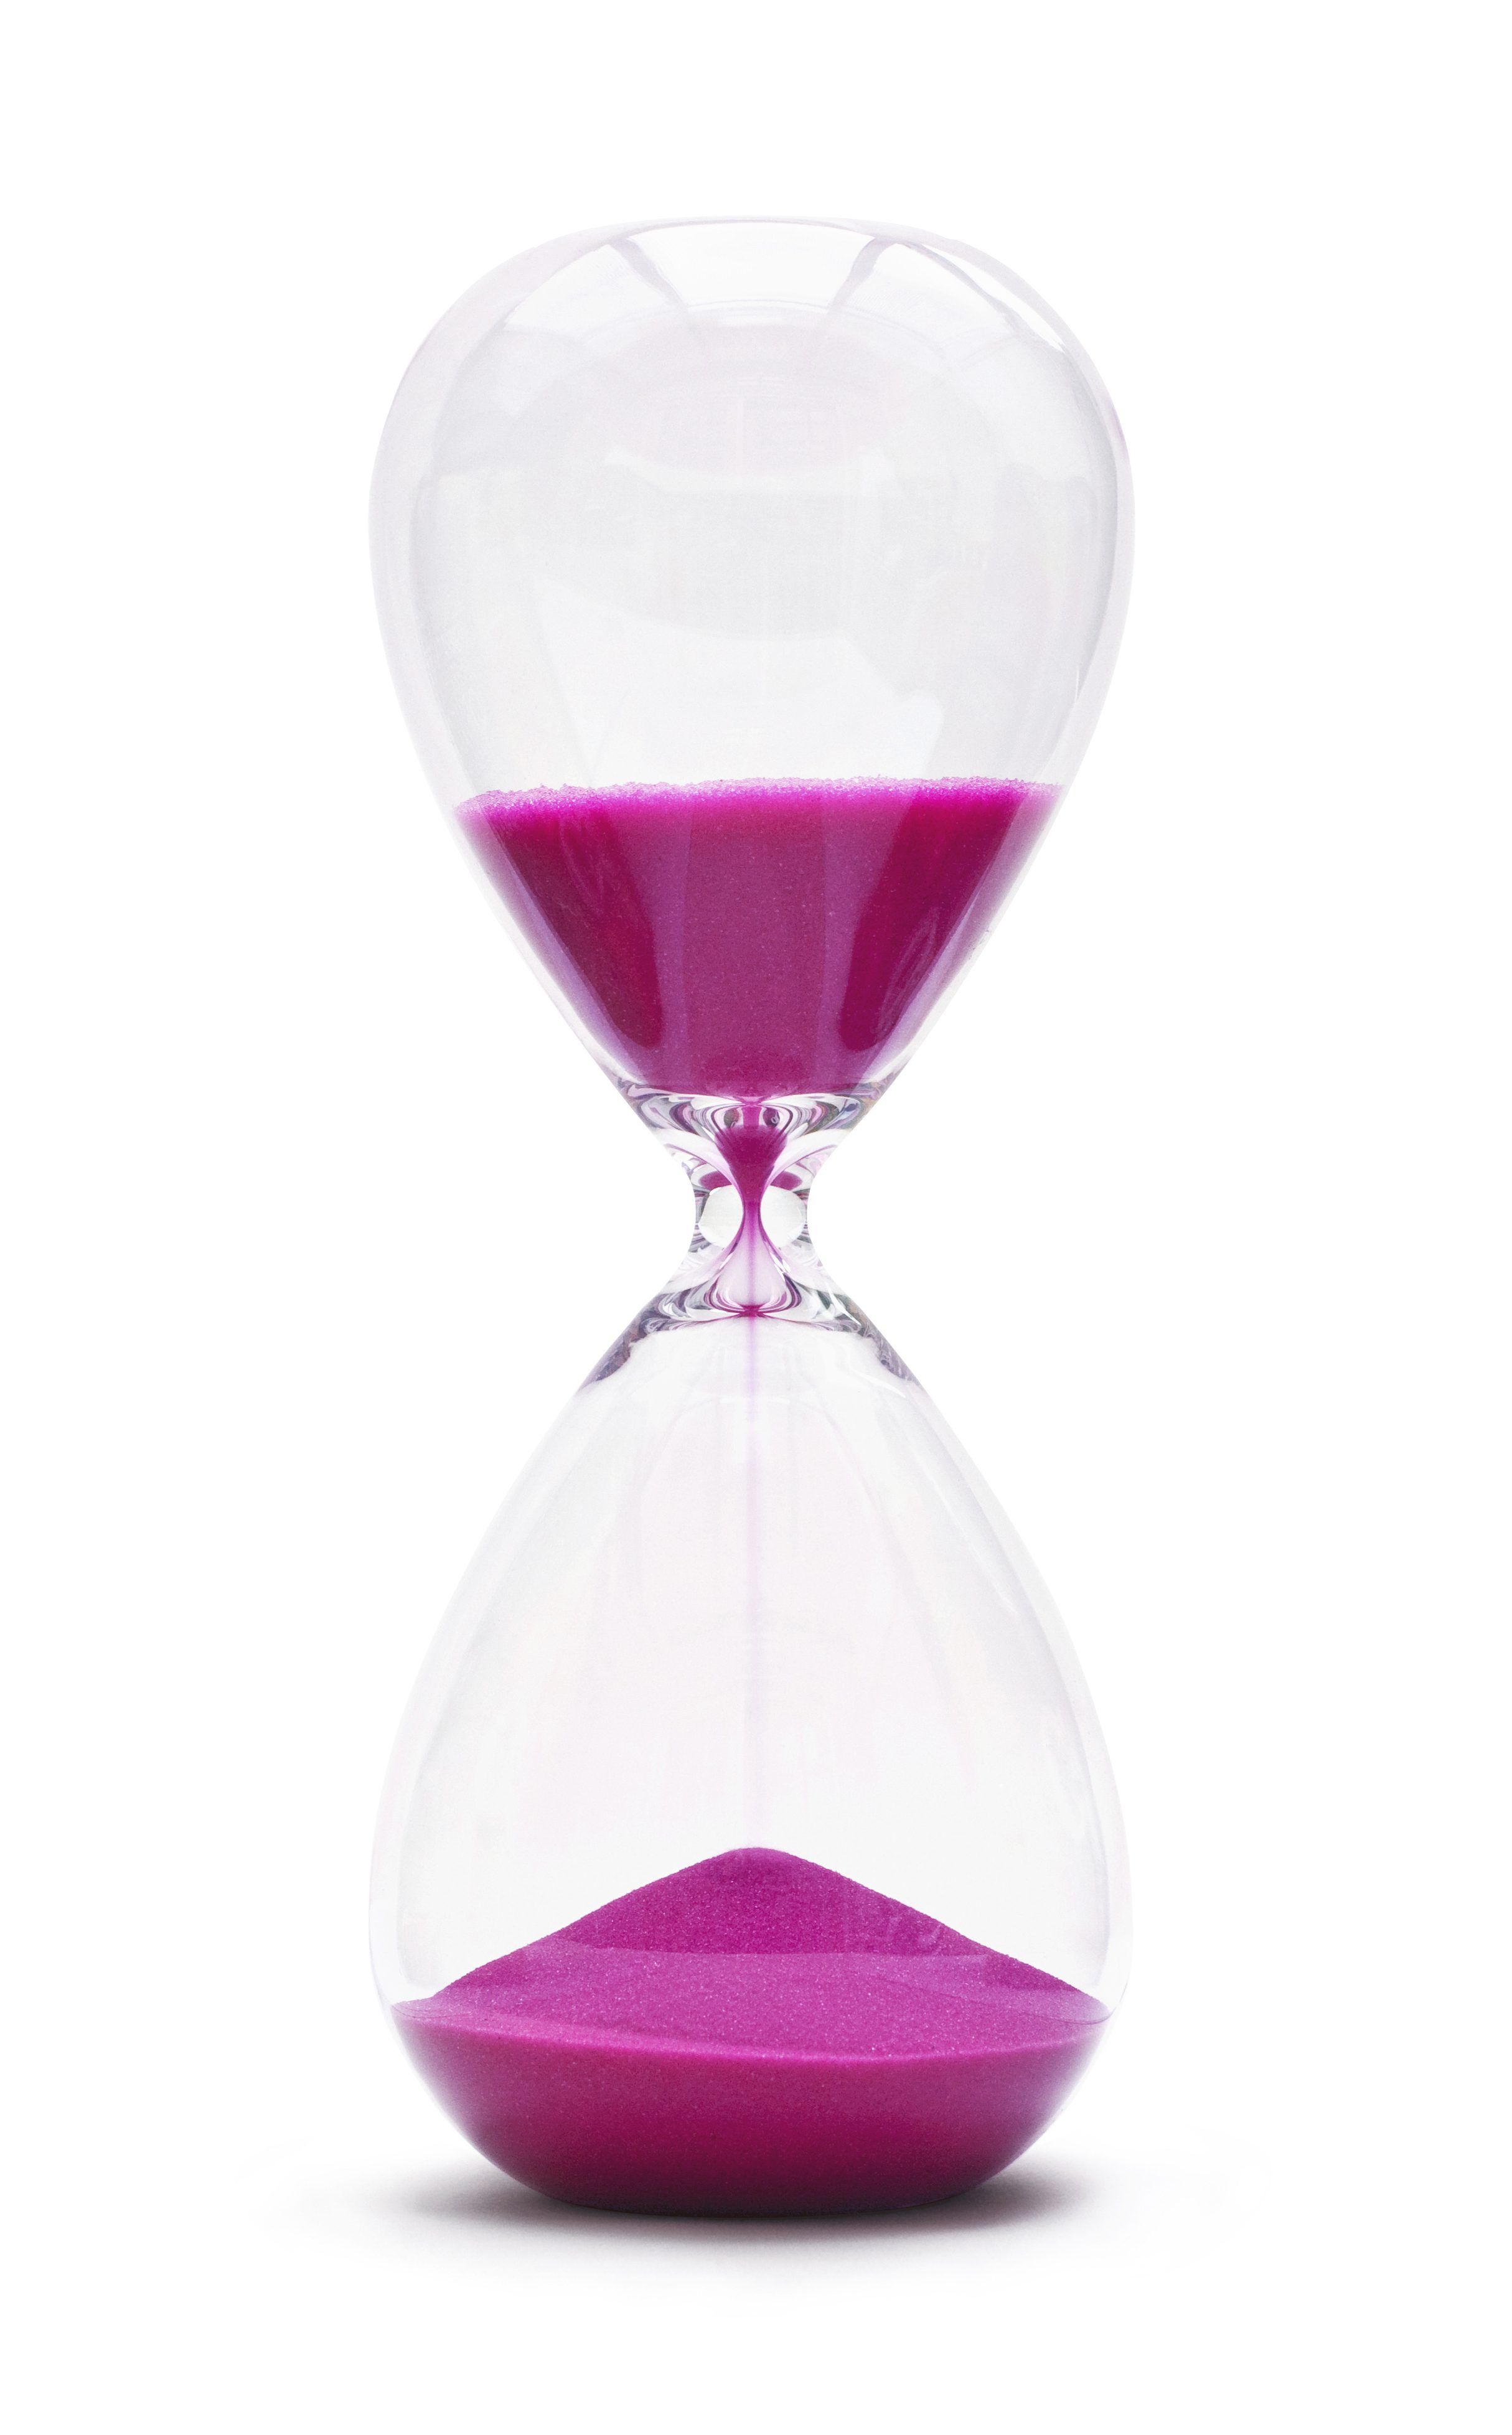 How to Make an Hourglass Sand Timer.